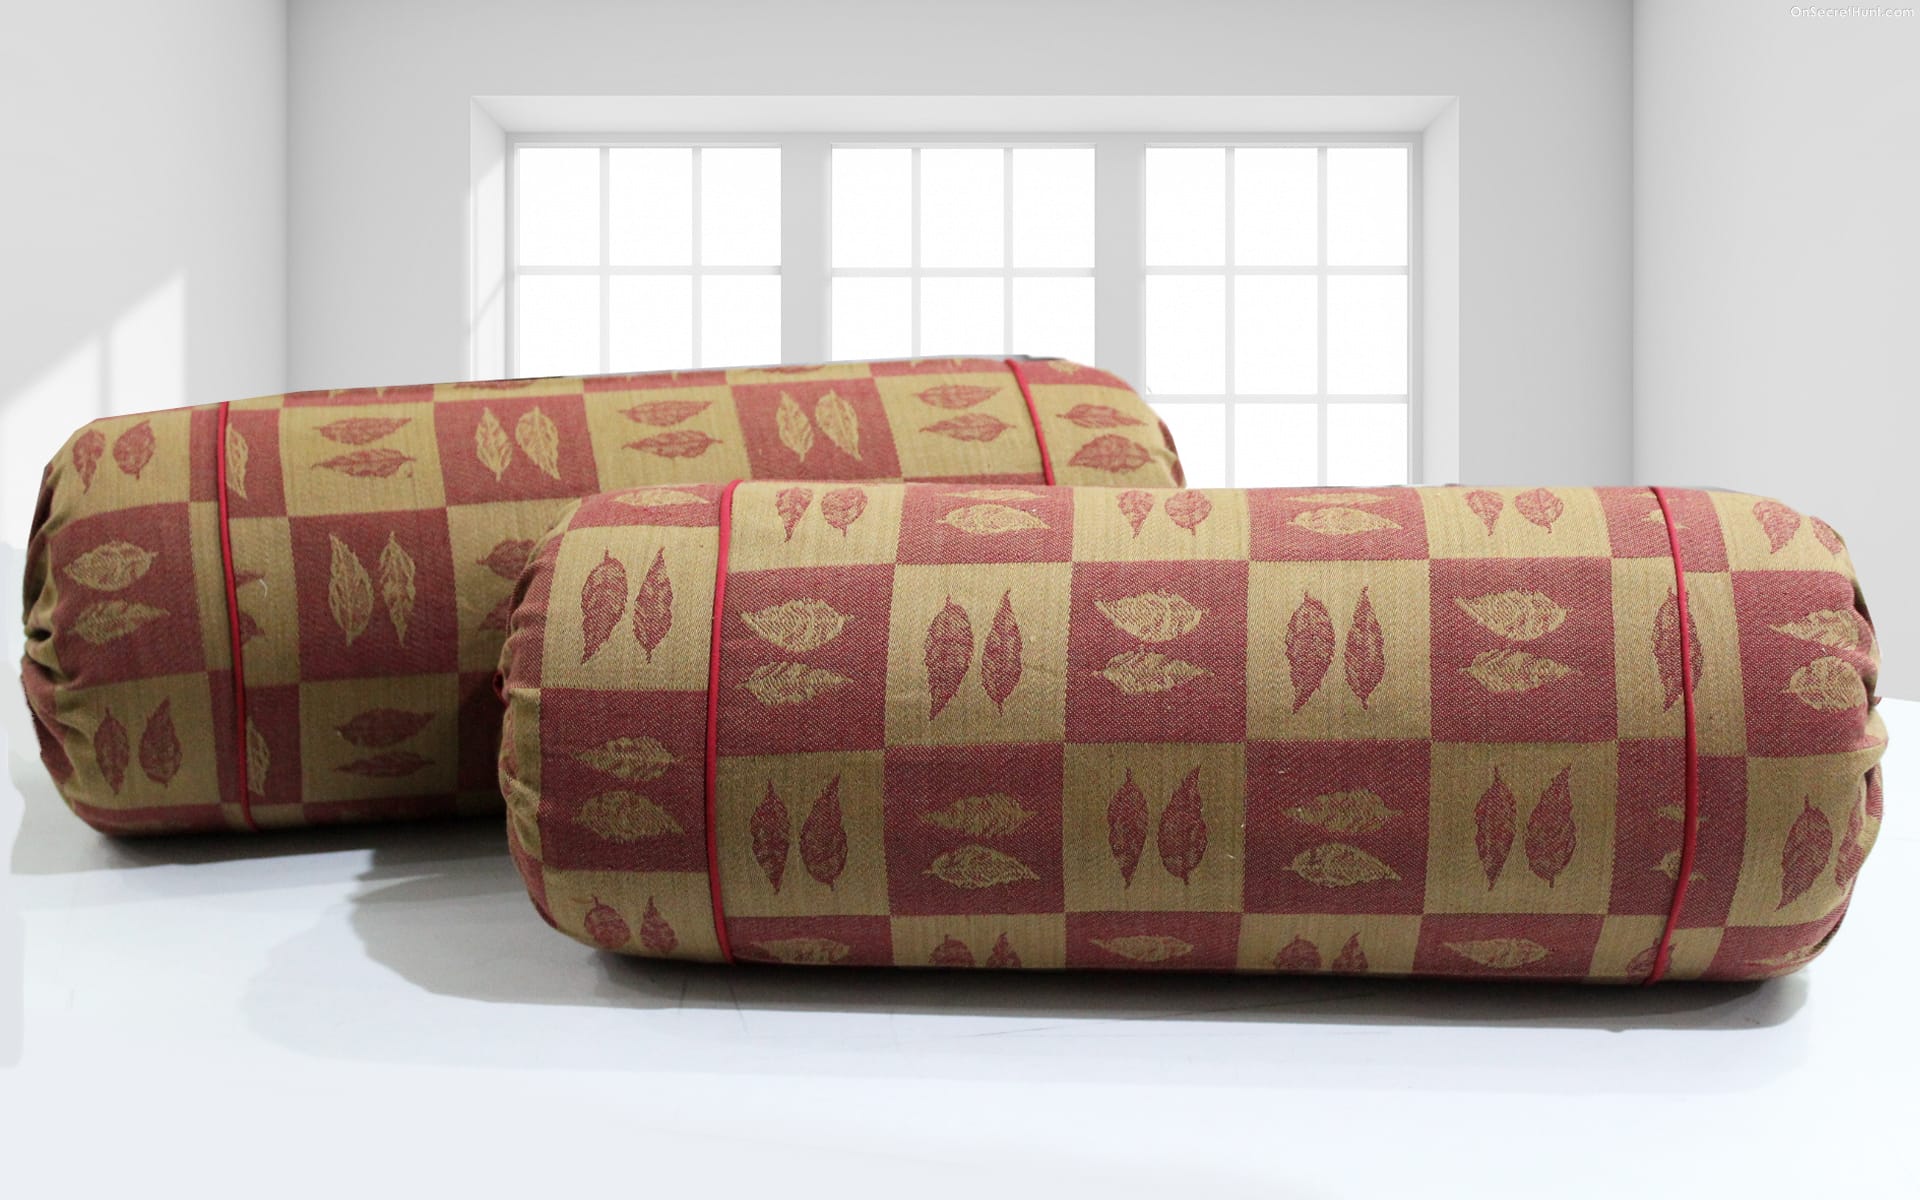 ALPHA Woven Cotton Floral 2 Pcs Bolster Cover set - Maroon & Brown